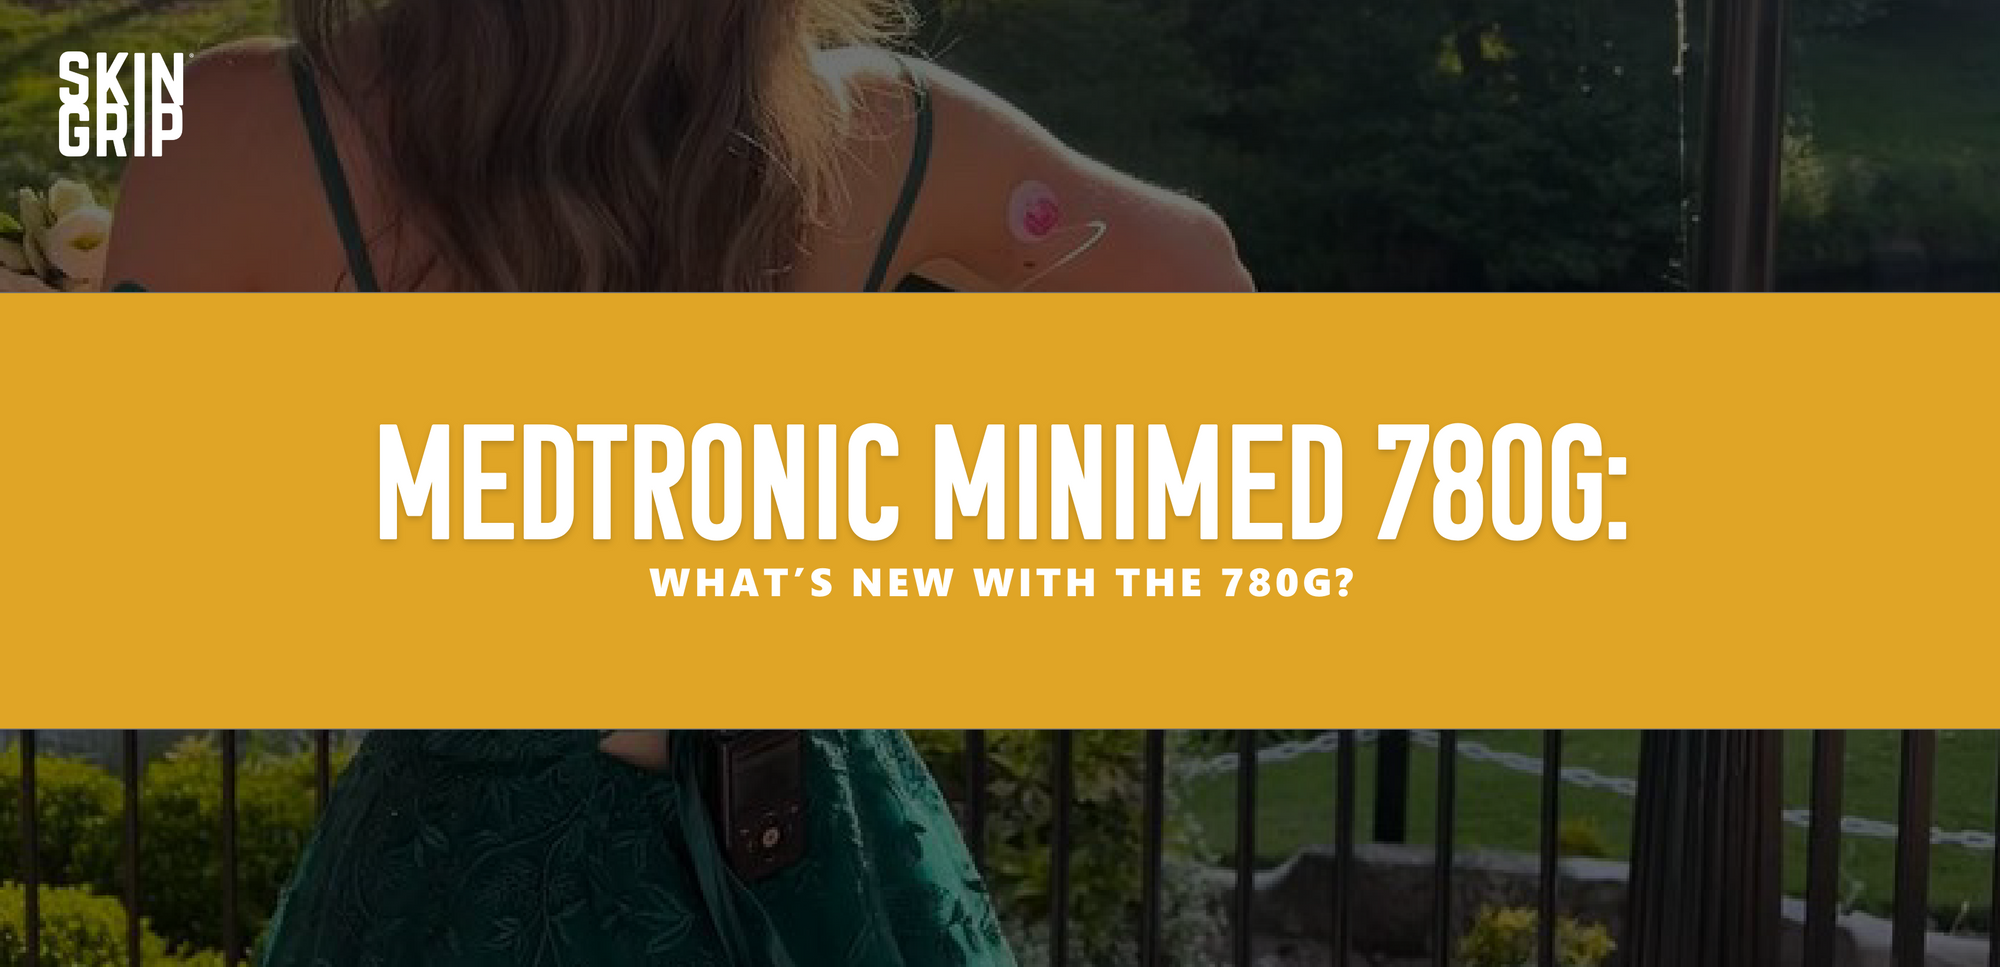 Medtronic MiniMed 780G: What’s new with the 780G?